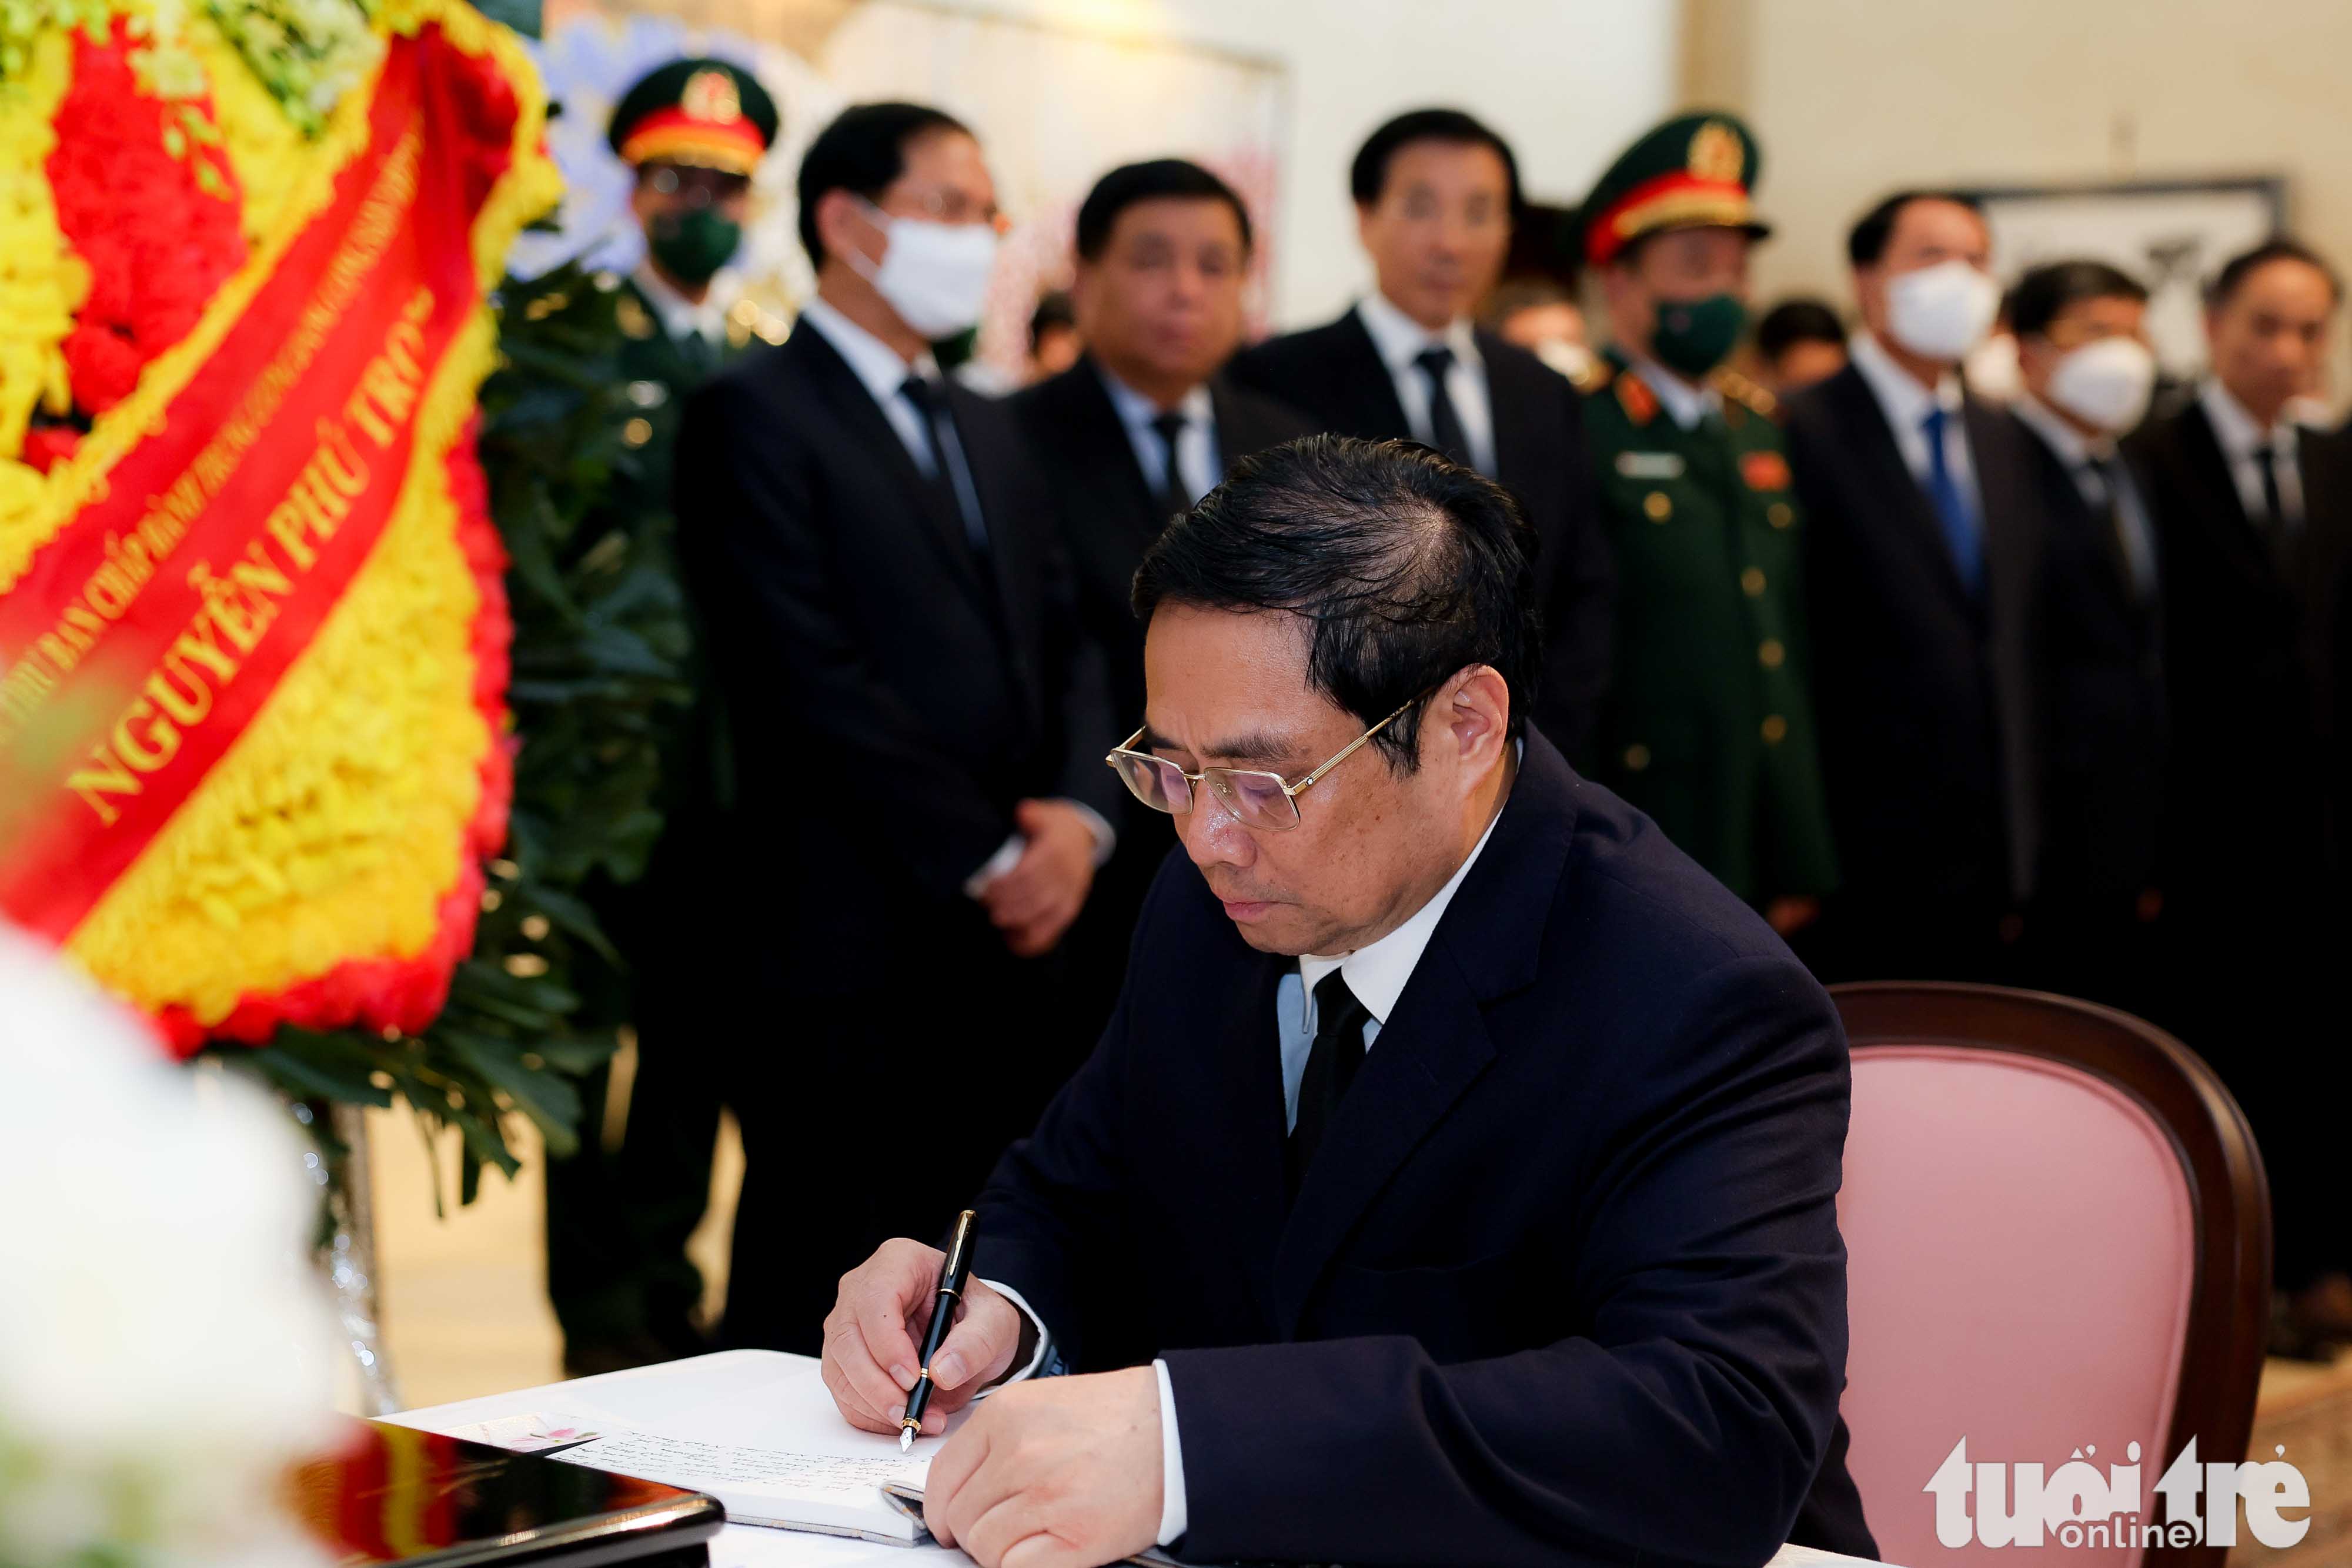 Vietnamese Prime Minister Pham Minh Chinh writes on the condolence book for former Japanese Prime Minister Shinzo Abe at the Embassy of Japan in Hanoi, July 11, 2022. Photo: Nguyen Khanh / Tuoi Tre